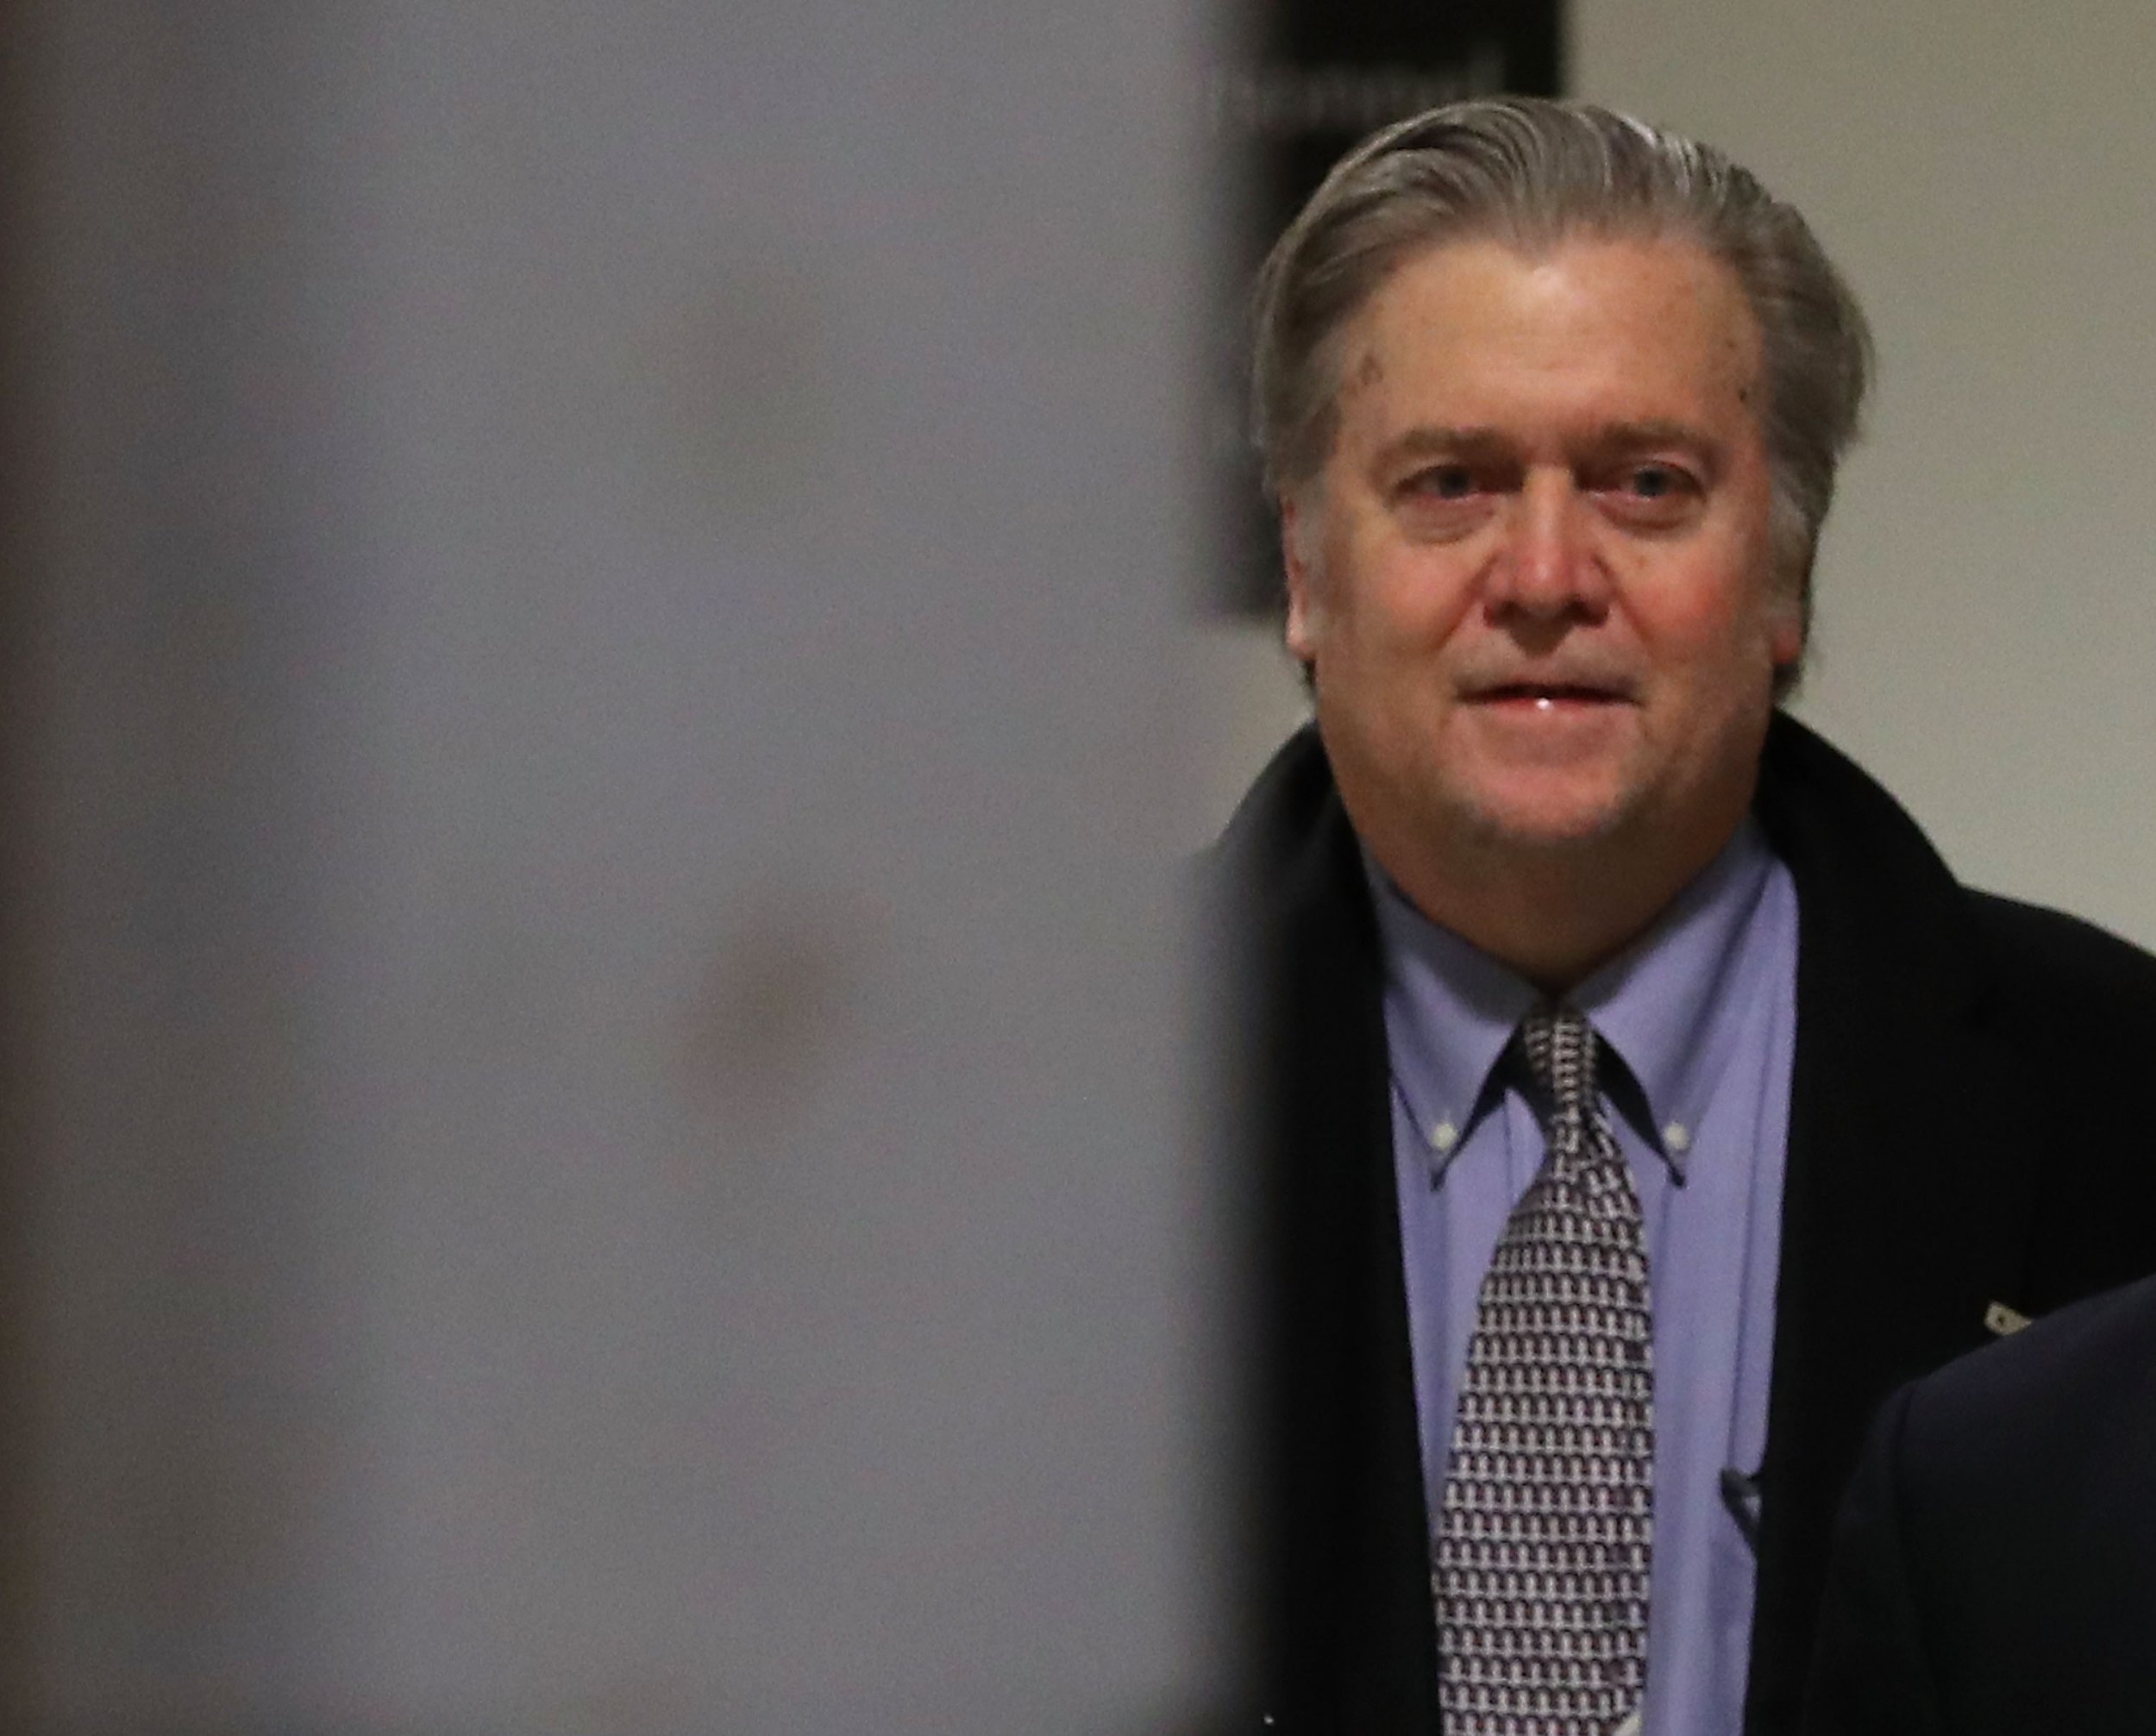 01_18_Bannon_obstruction_justice